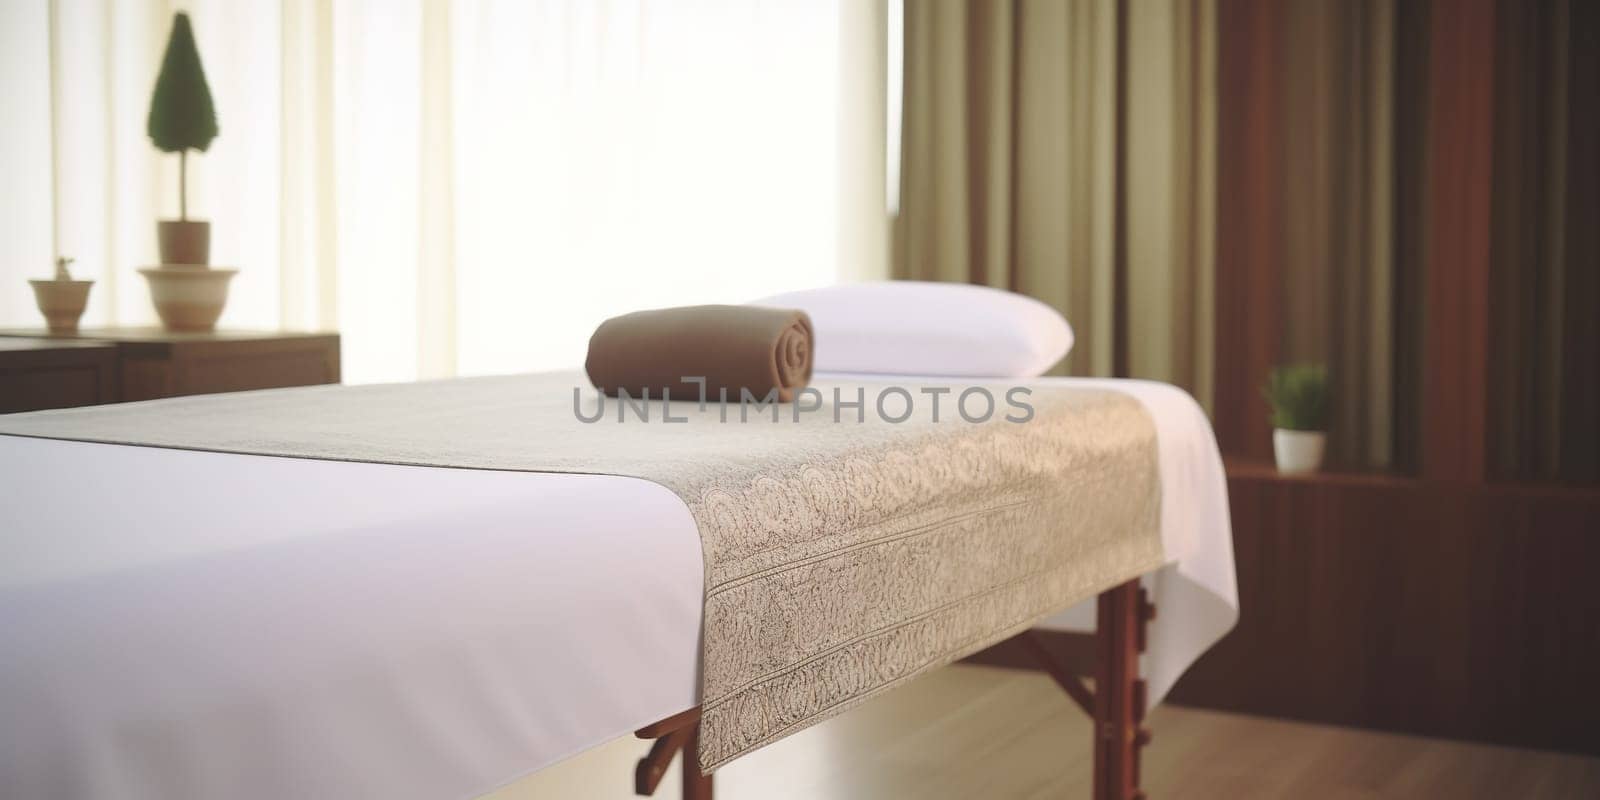 white massage table in a room, ready for massage